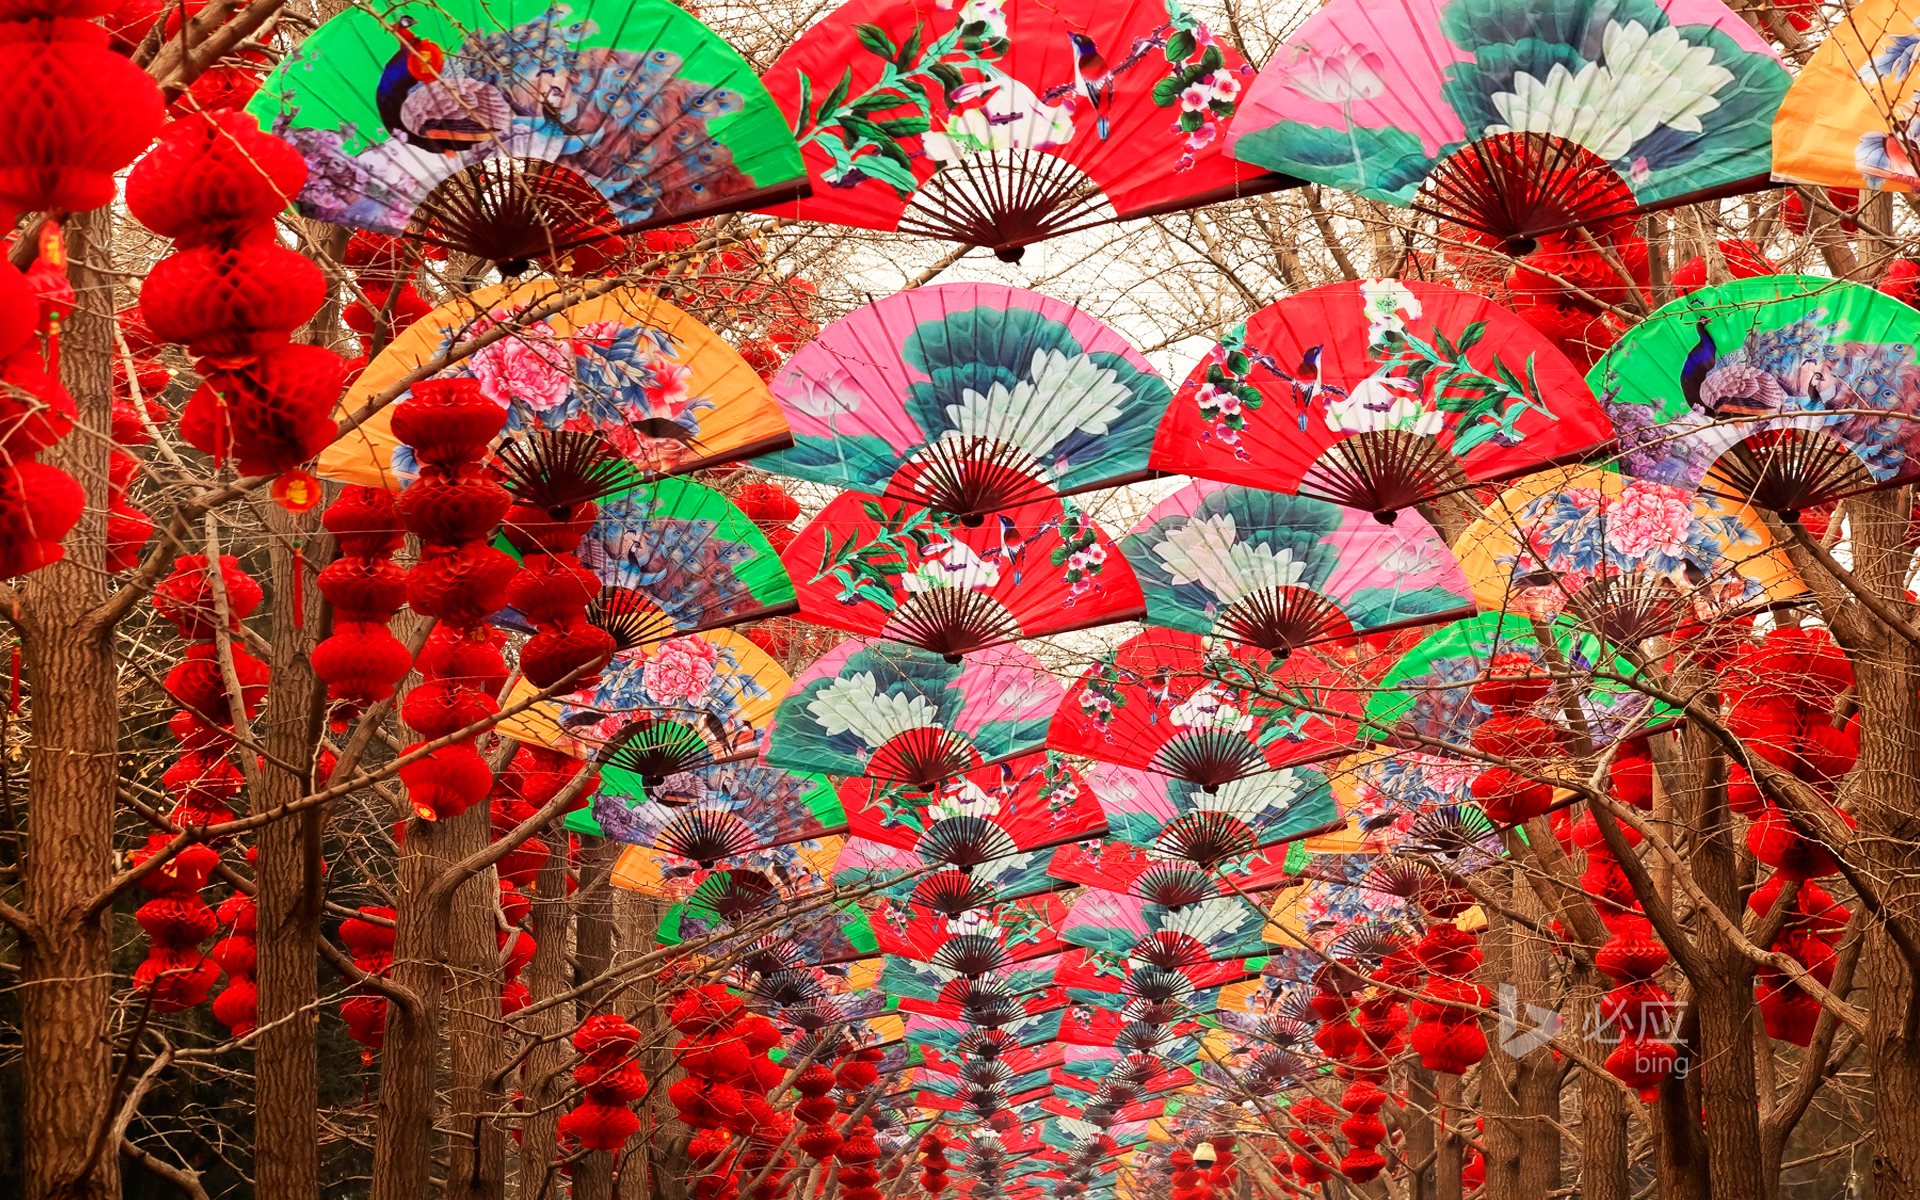 Paper fans and red lanterns during the Spring Festival in Beijing Temple of Heaven